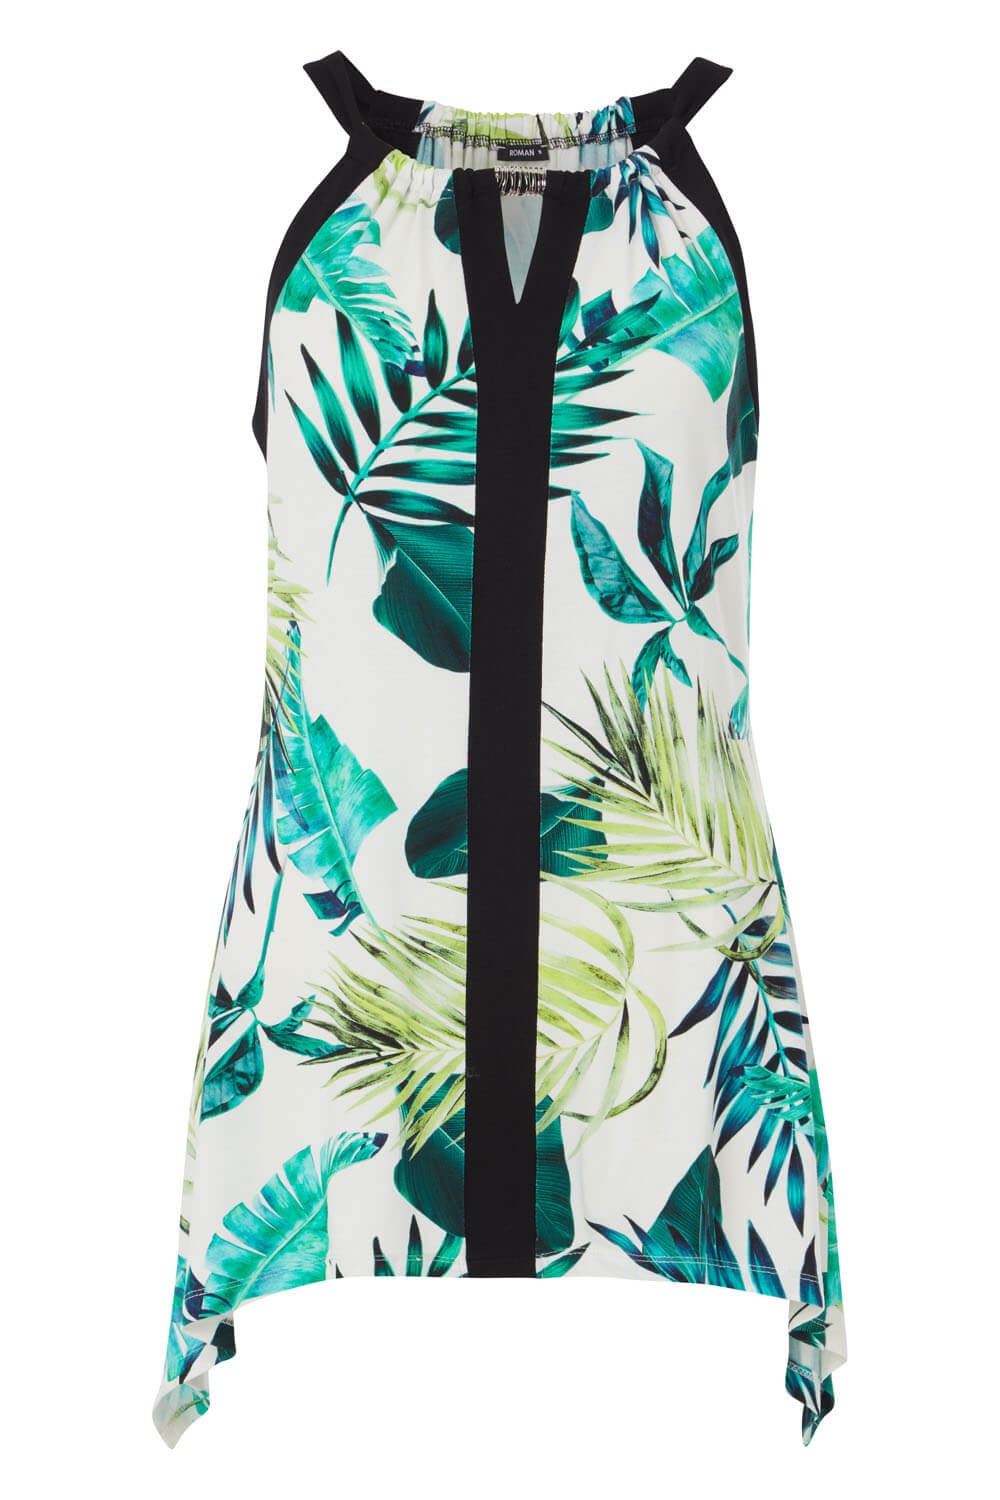 Ivory  Tropical Print Halter Neck Top, Image 5 of 5